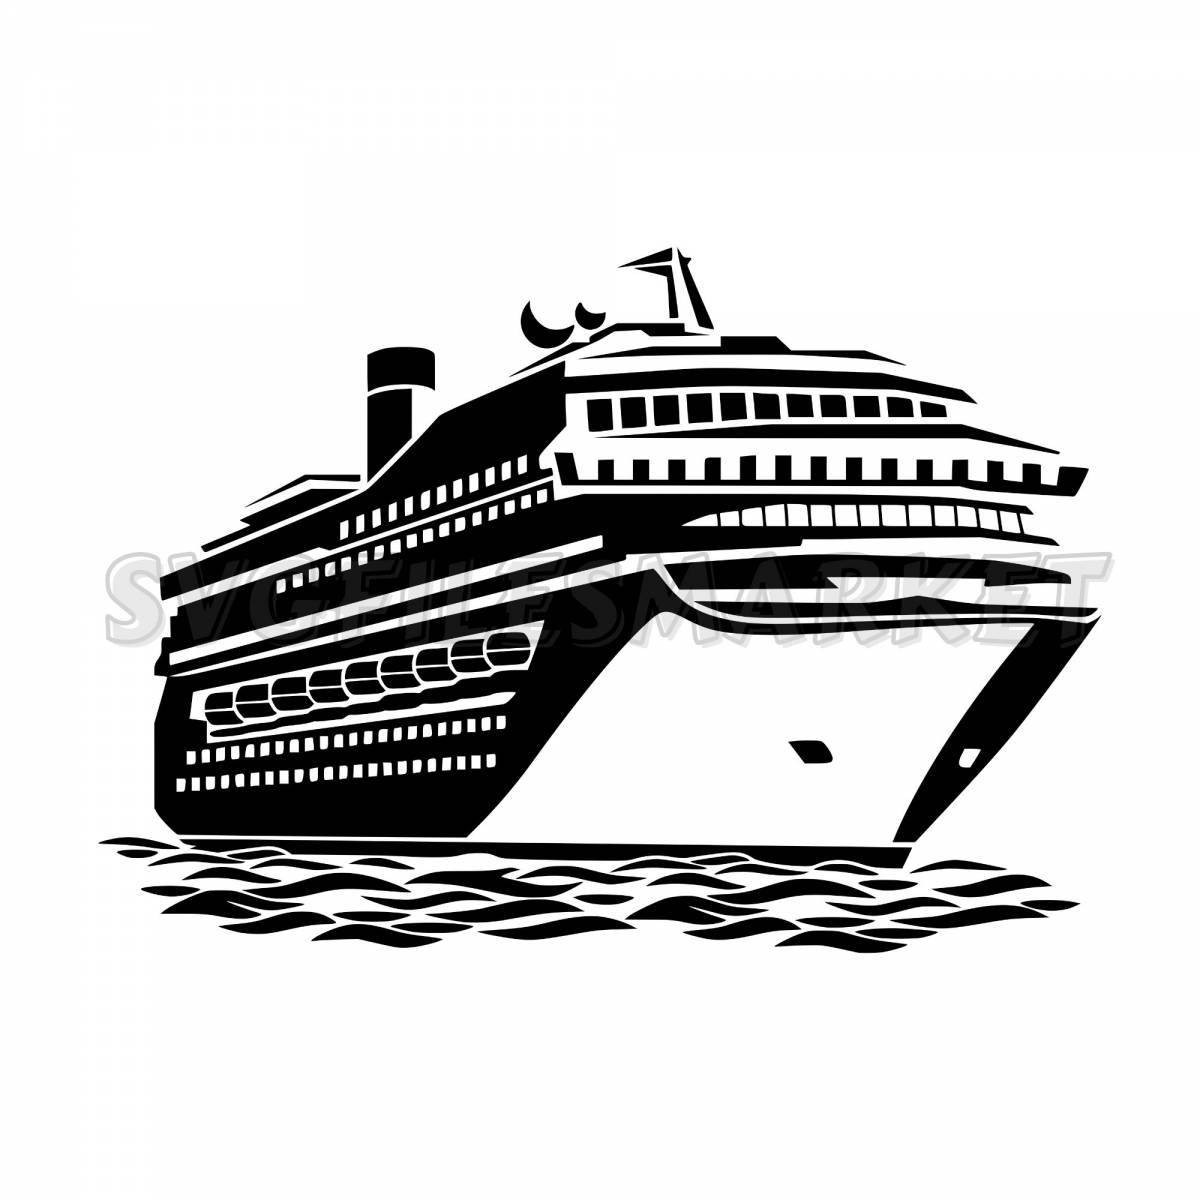 Colourful passenger ship coloring page